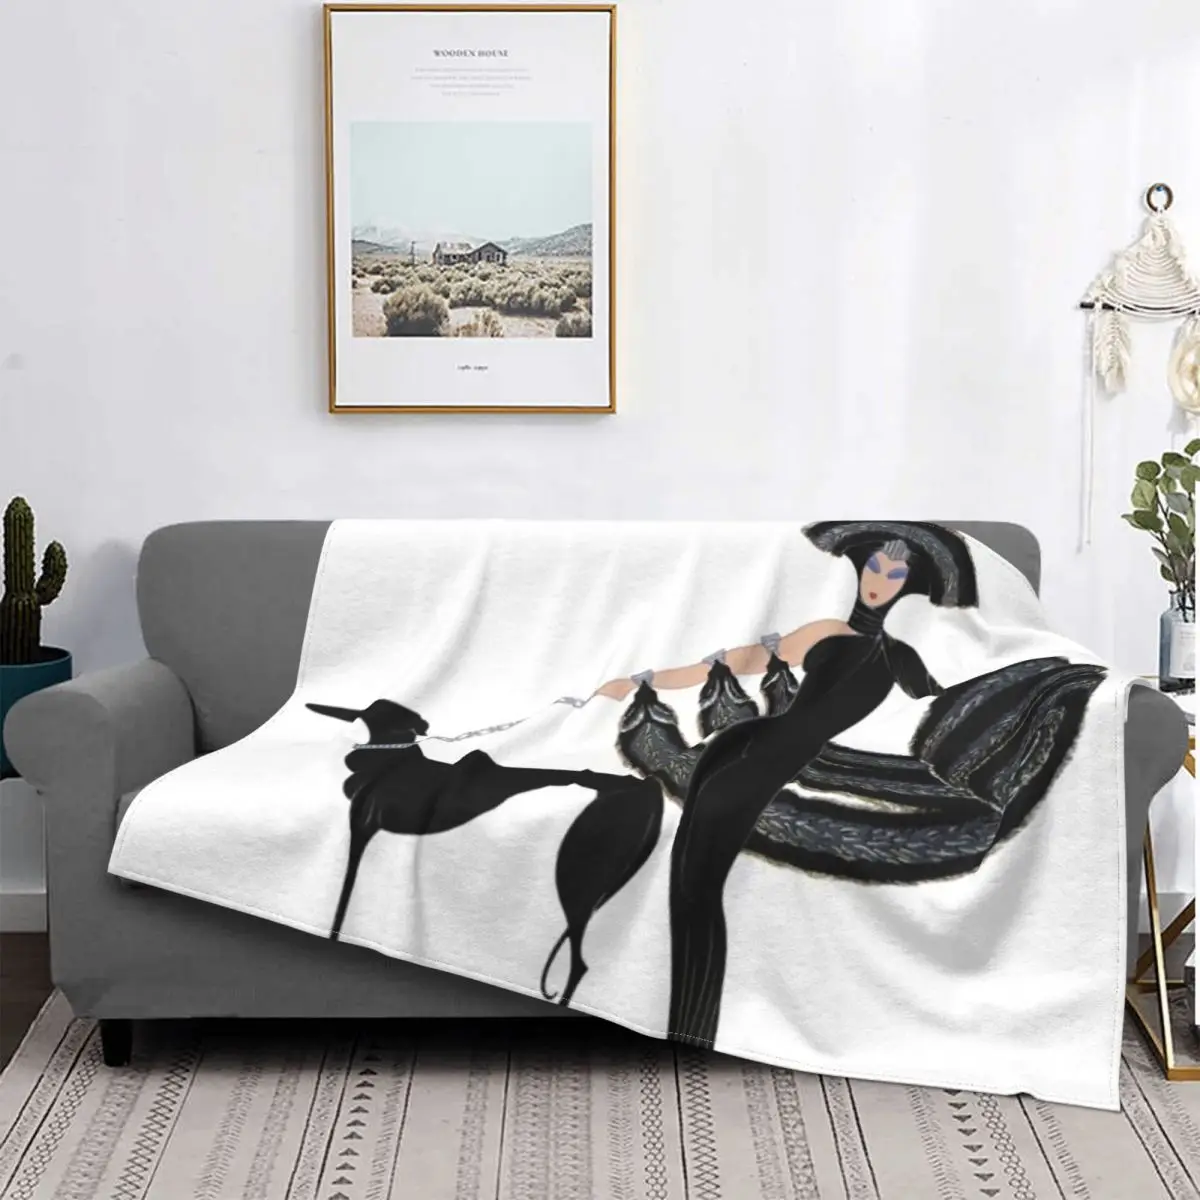 

Warm Flannel Throw Blanket Fashion illustration Blankets for Bed Couch Sofa Home Decor Gifts Art Deco era Haute Couture Blanket